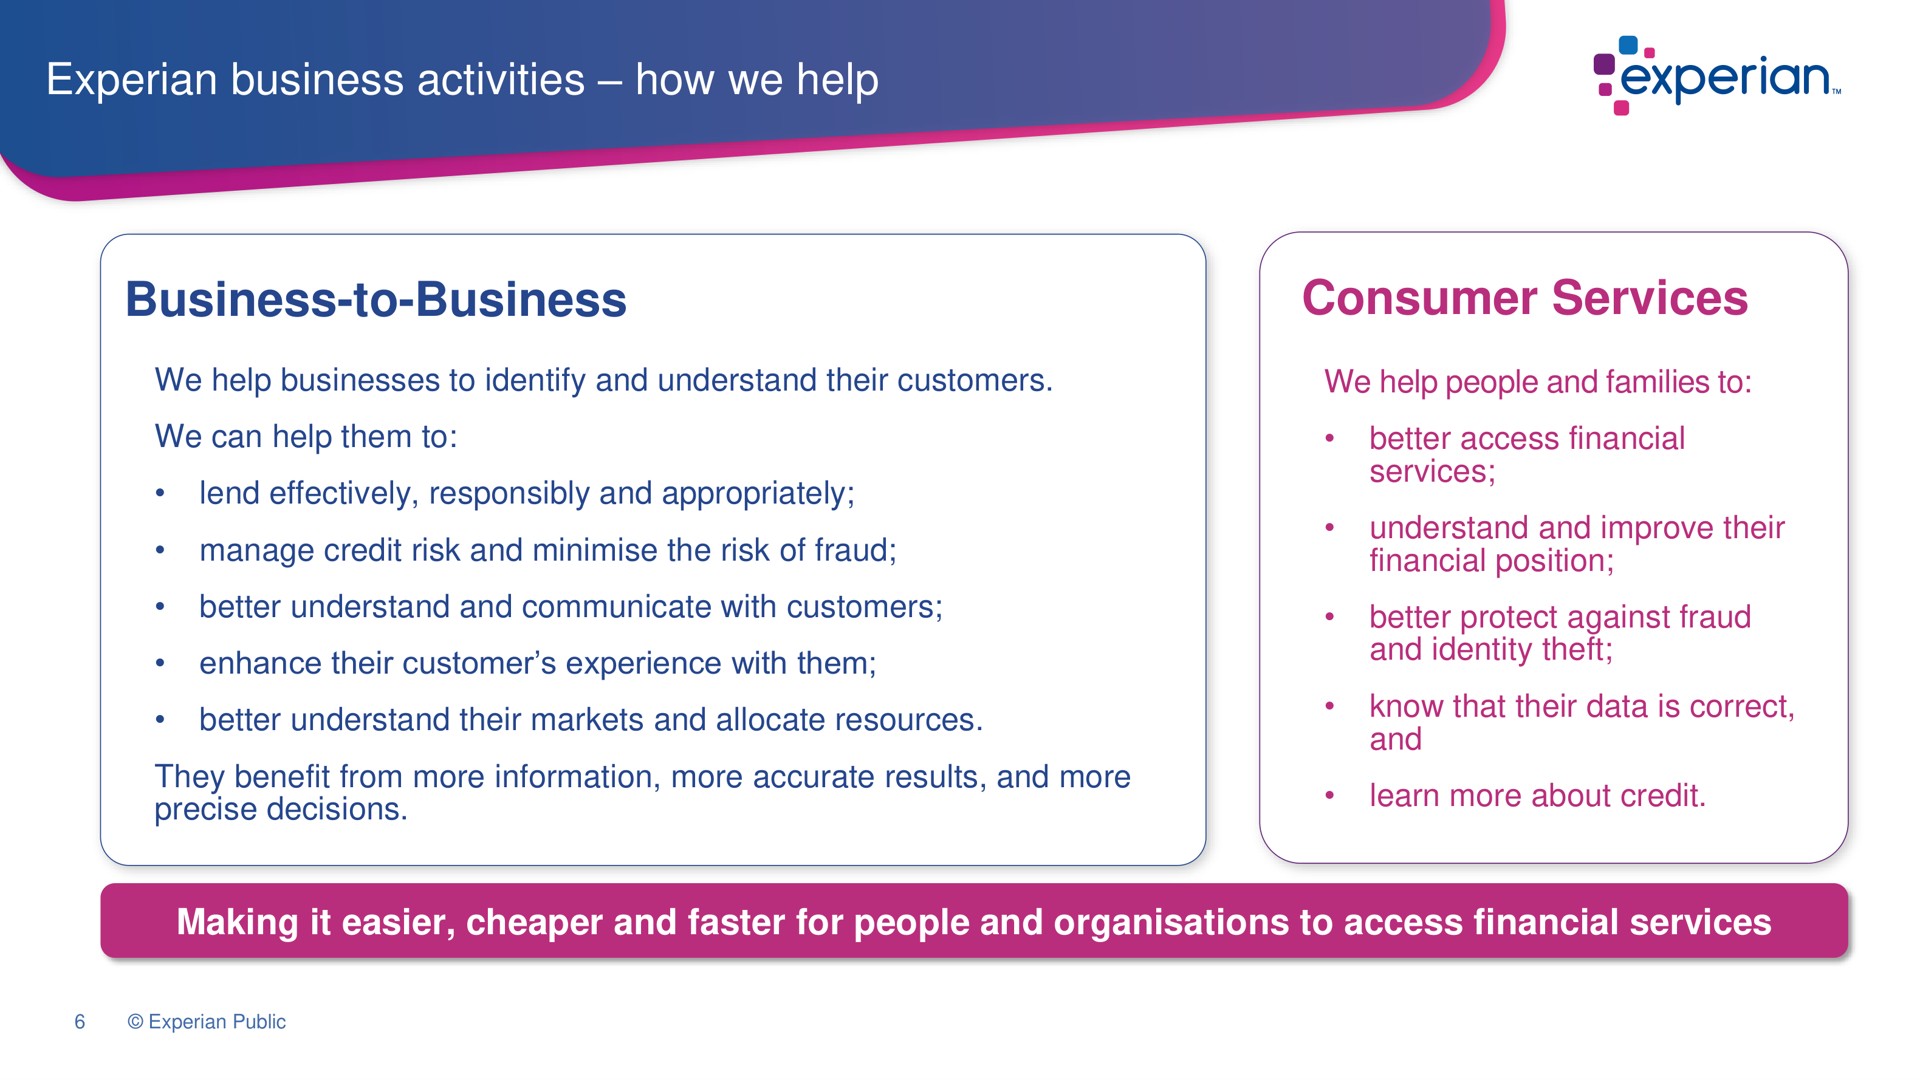 business activities how we help business to business consumer services we help businesses to identify and understand their customers we help people and families to we can help them to lend effectively responsibly and appropriately manage credit risk and the risk of fraud better understand and communicate with customers enhance their customer experience with them better understand their markets and allocate resources they benefit from more information more accurate results and more precise decisions better access financial services understand and improve their financial position better protect against fraud and identity theft know that their data is correct and learn more about credit making it easier and faster for people and to access financial services | Experian